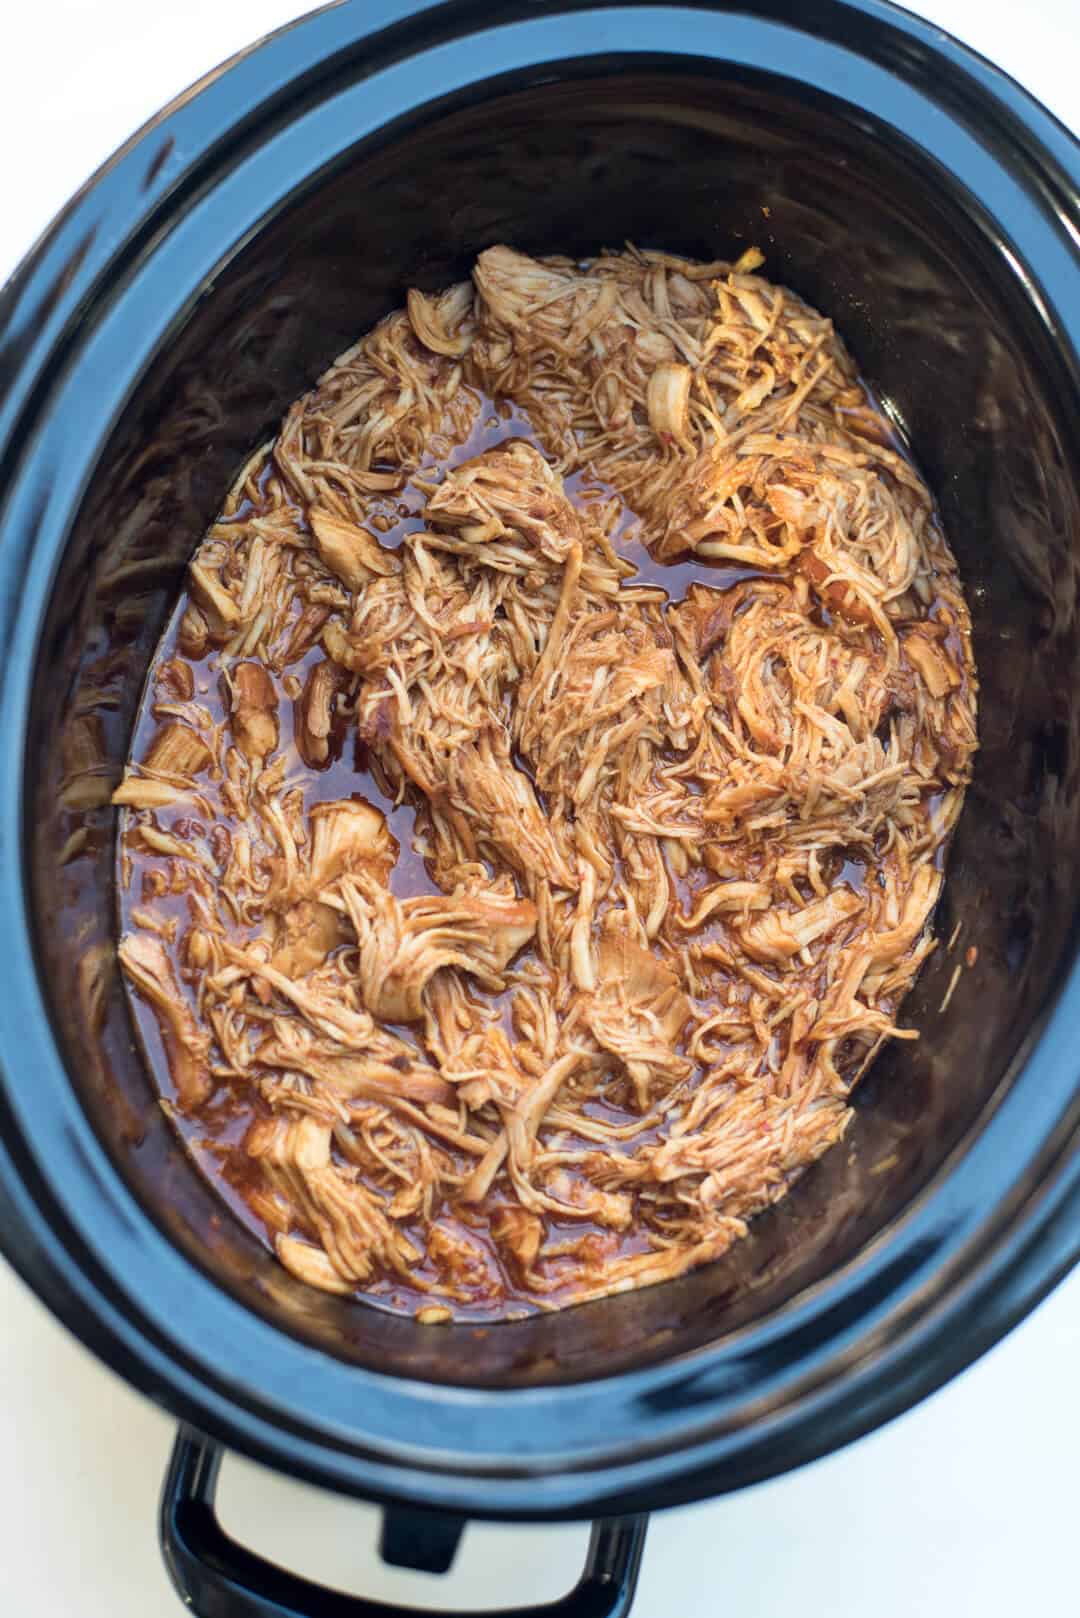 The chicken is shredded into the sauce in the slow cooker.